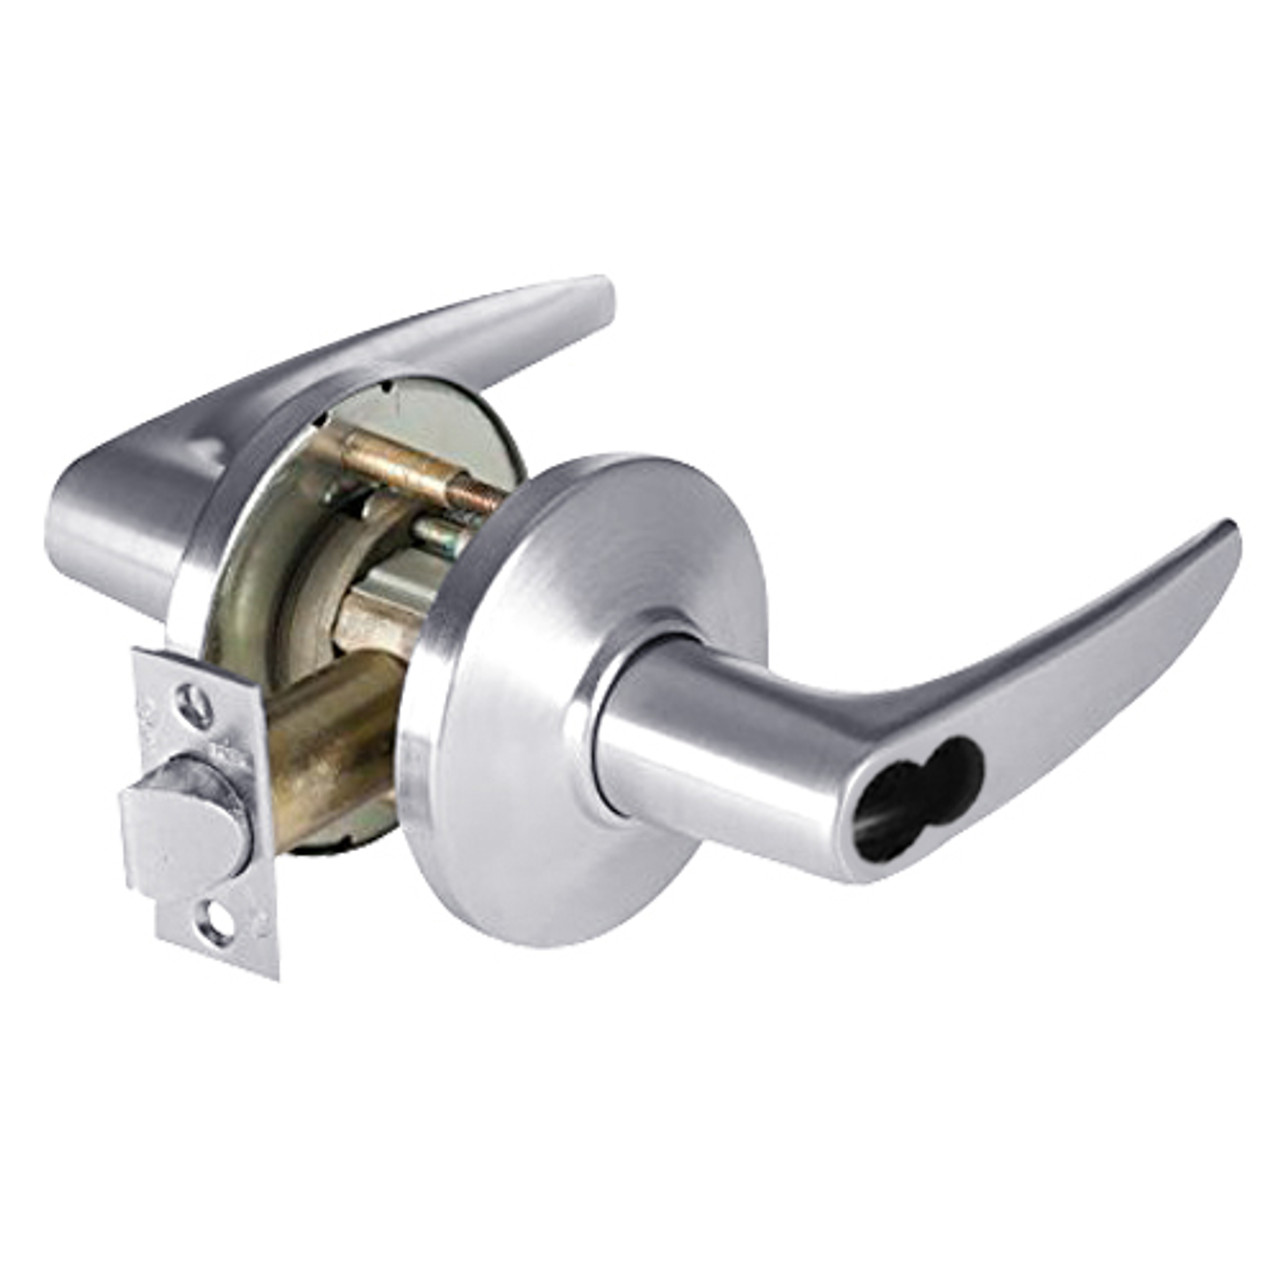 9KW37DEU16DSTK625 Best 9KW Series Fail Secure Electromechanical Heavy Duty Cylindrical Lock with Curved w/ No Return Style in Bright Chrome